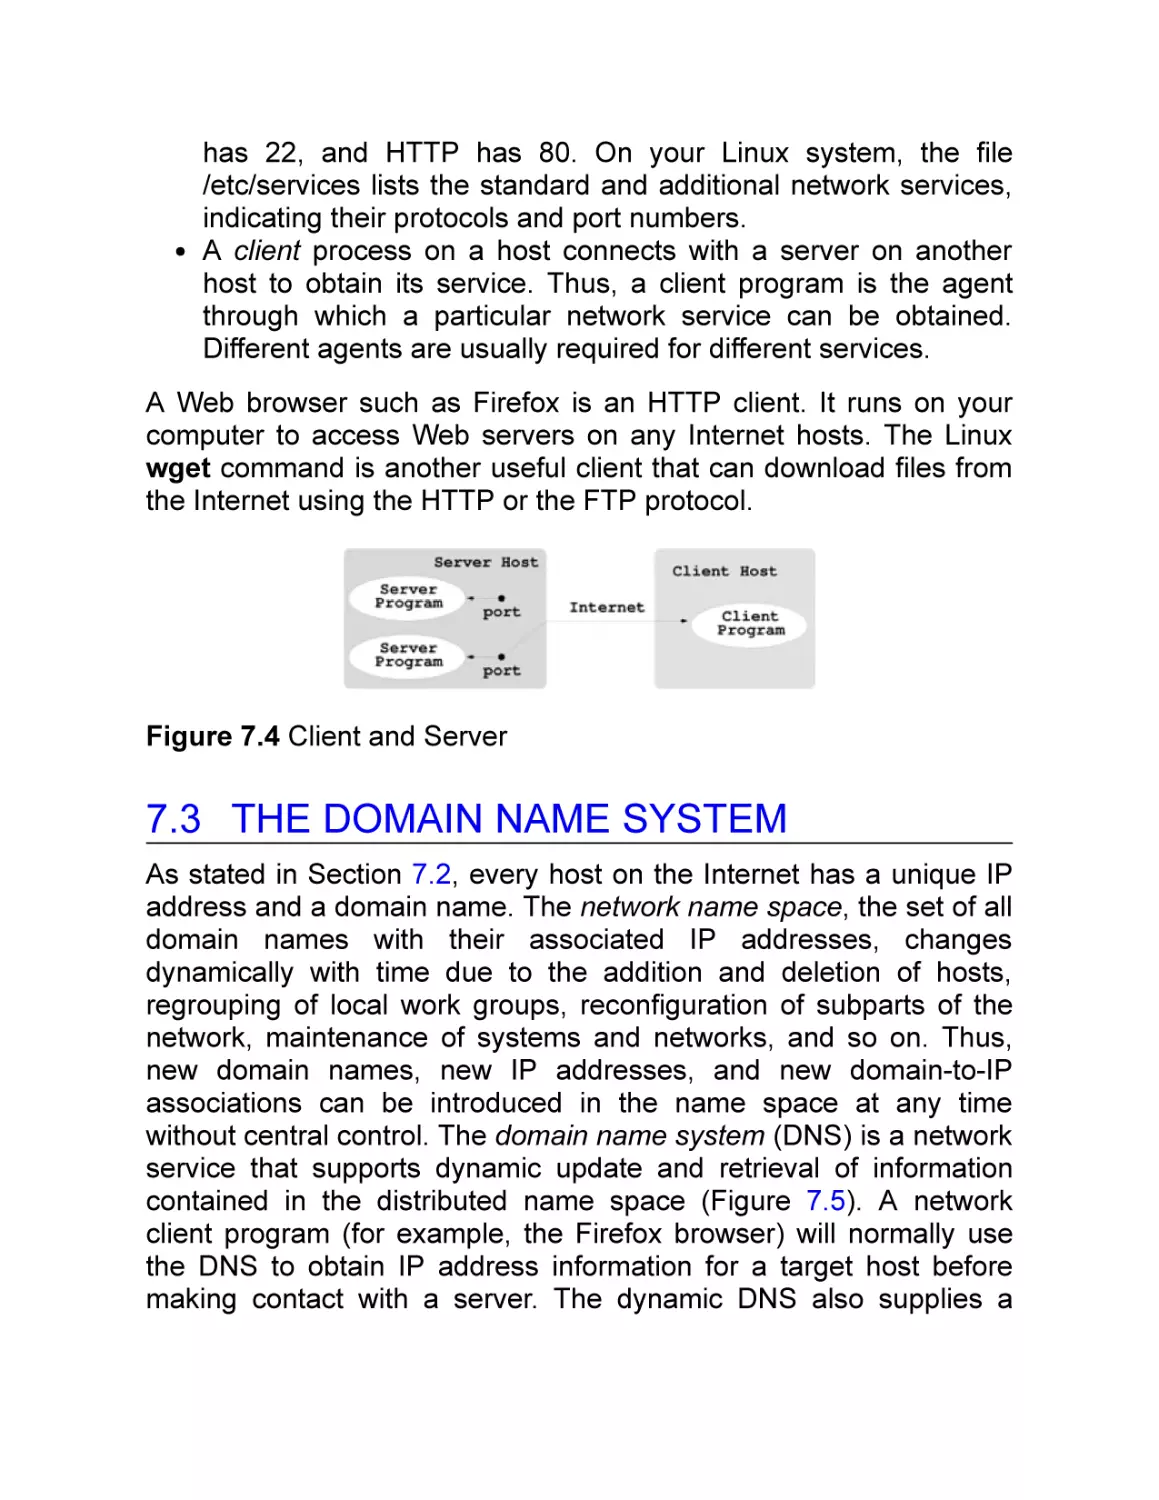 7.3 The Domain Name System